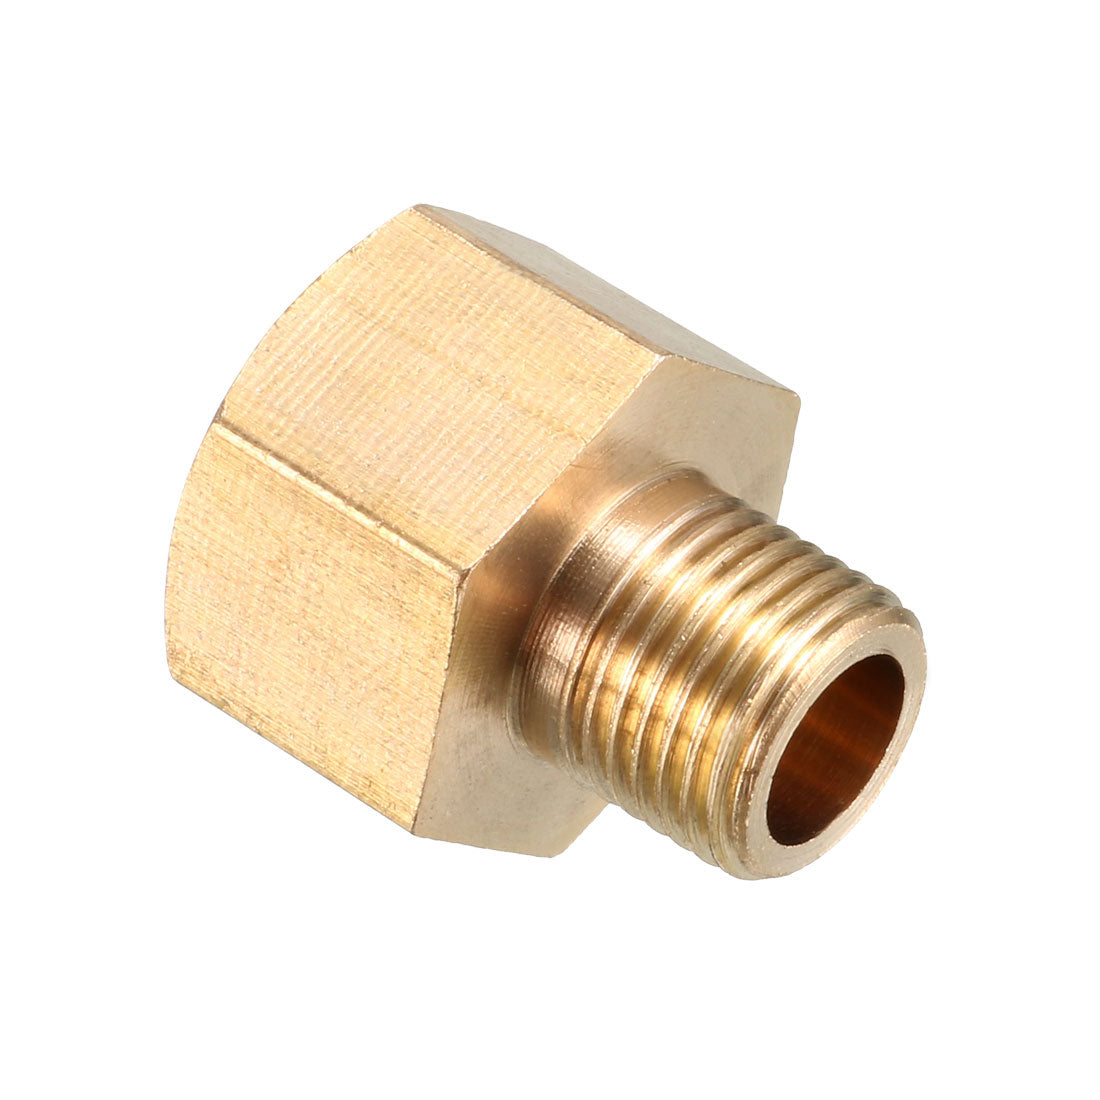 uxcell Uxcell Brass Threaded Pipe Fitting 1/8 PT Male x 1/4 PT Female Coupling 3pcs